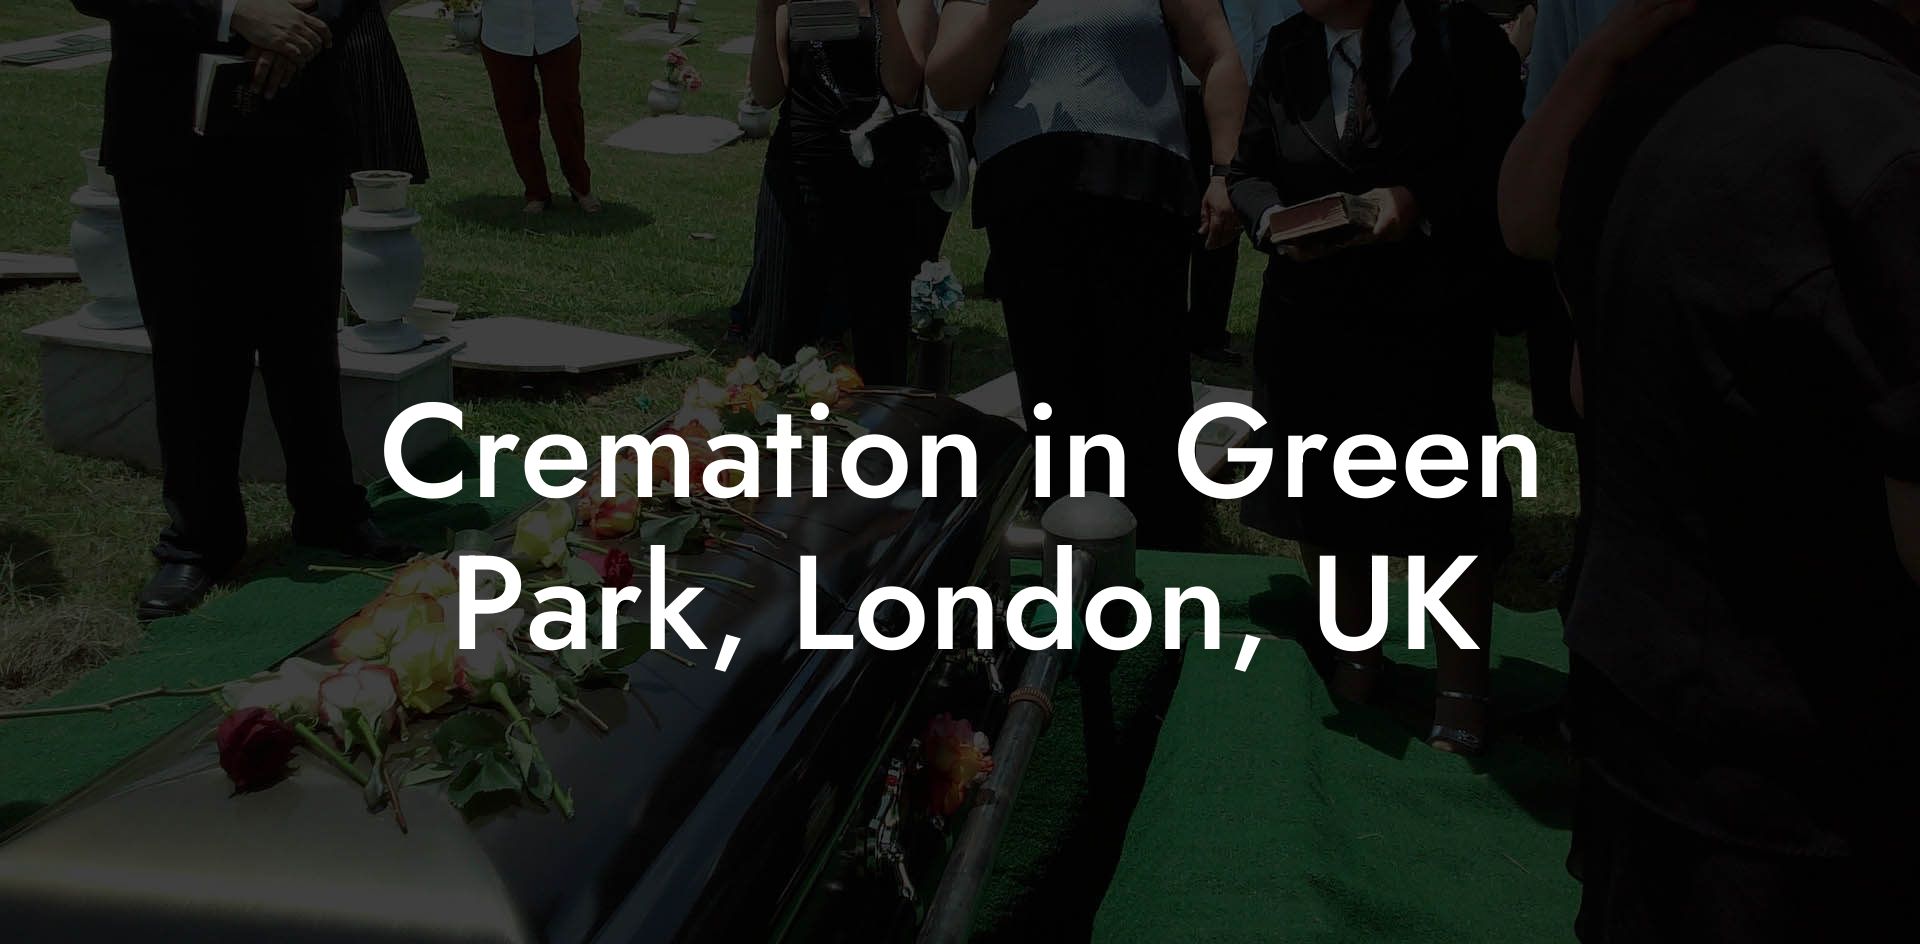 Cremation in Green Park, London, UK